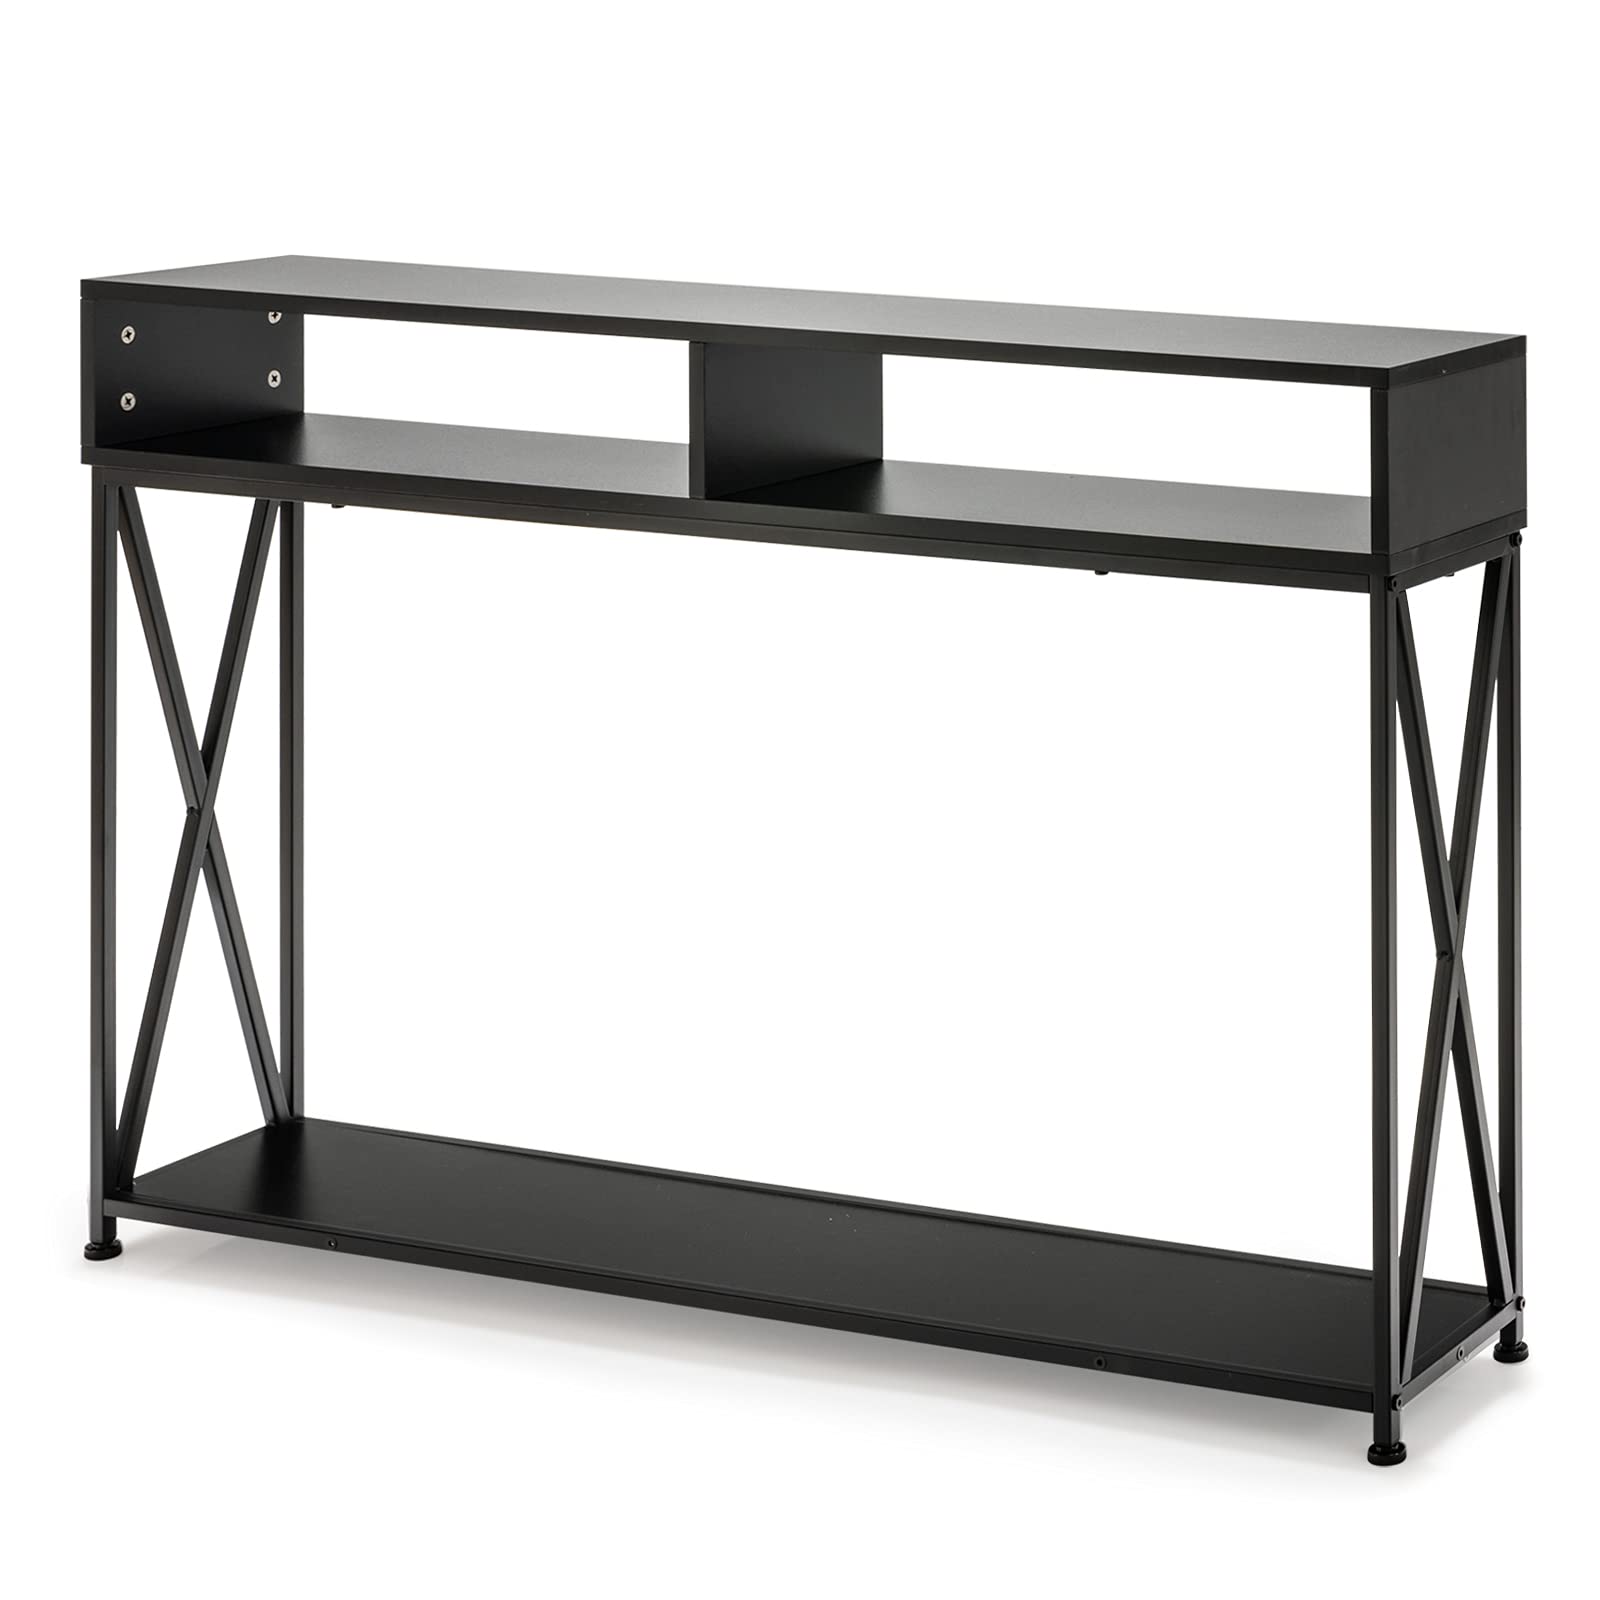 Giantex Console Table 2 Tier Sofa Table with Open Shelf & Storage Compartments